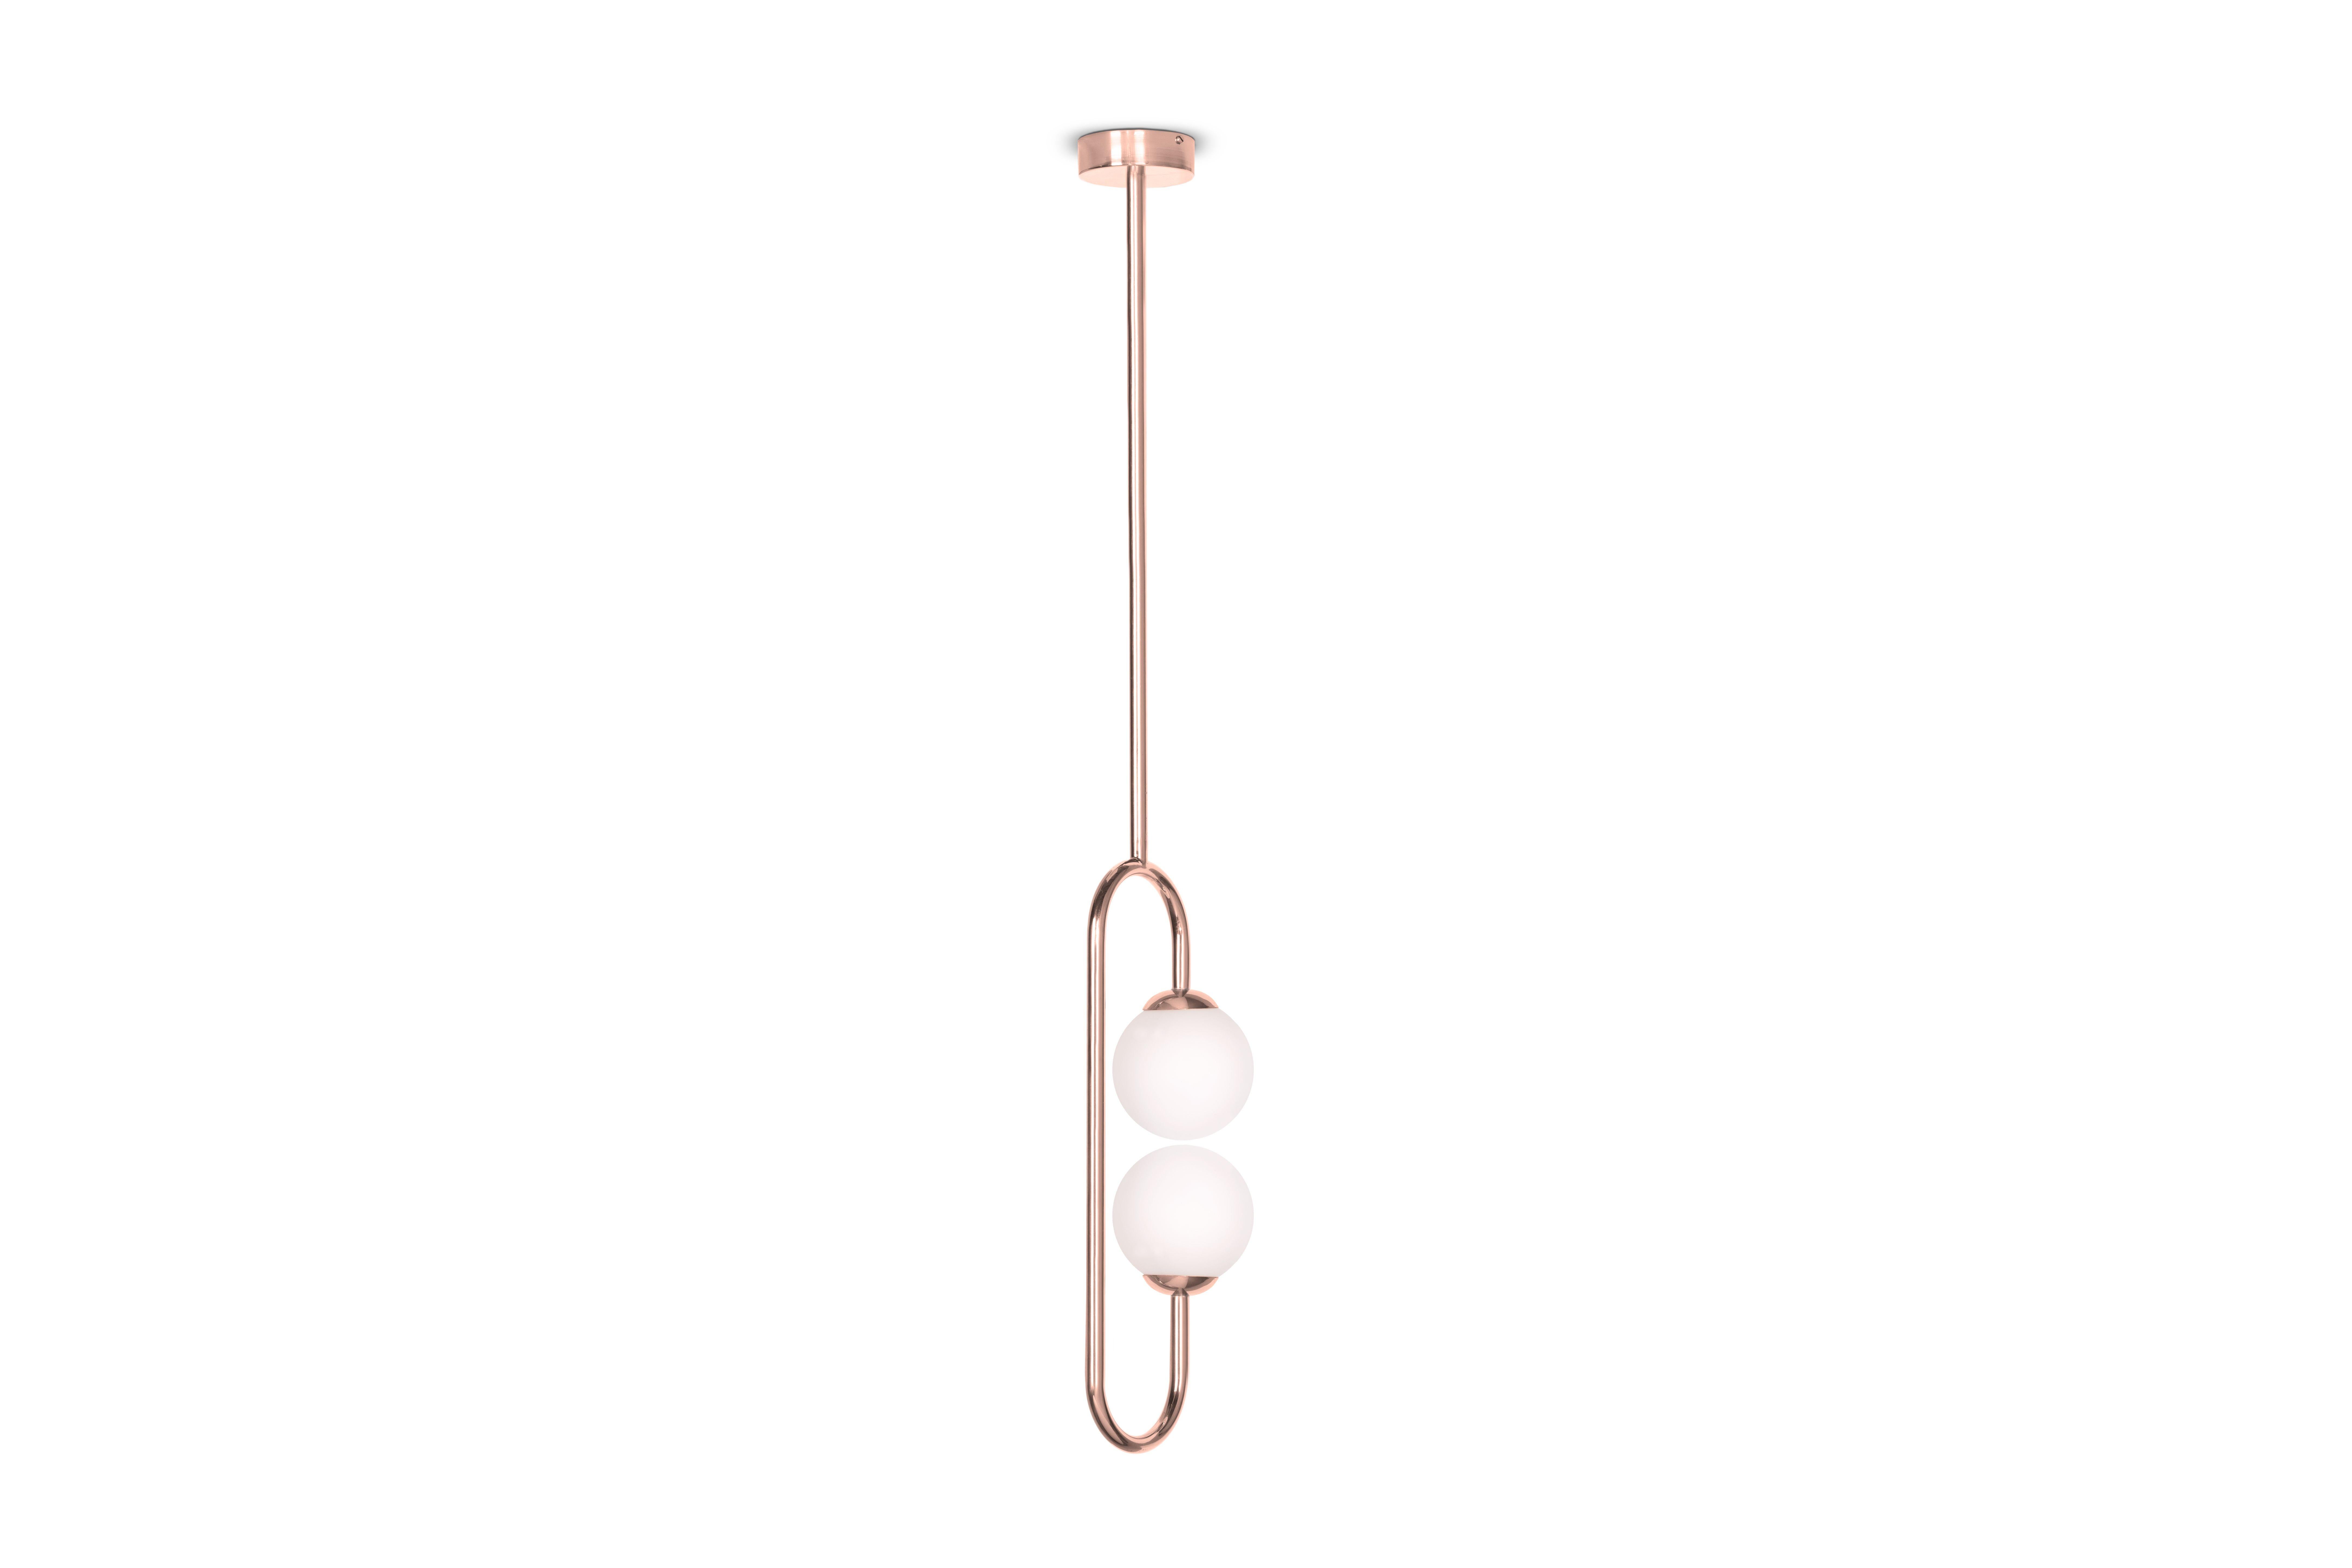 Olivia copper ceiling lamp, Royal Stranger
Dimensions: W 20 x D 14 x H 114 cm
Materials: Body polished brass. Glass balls Blown glass opal diffuser.


Inspired by the femininity and using bold and vibrant color schemes, this collection is meant